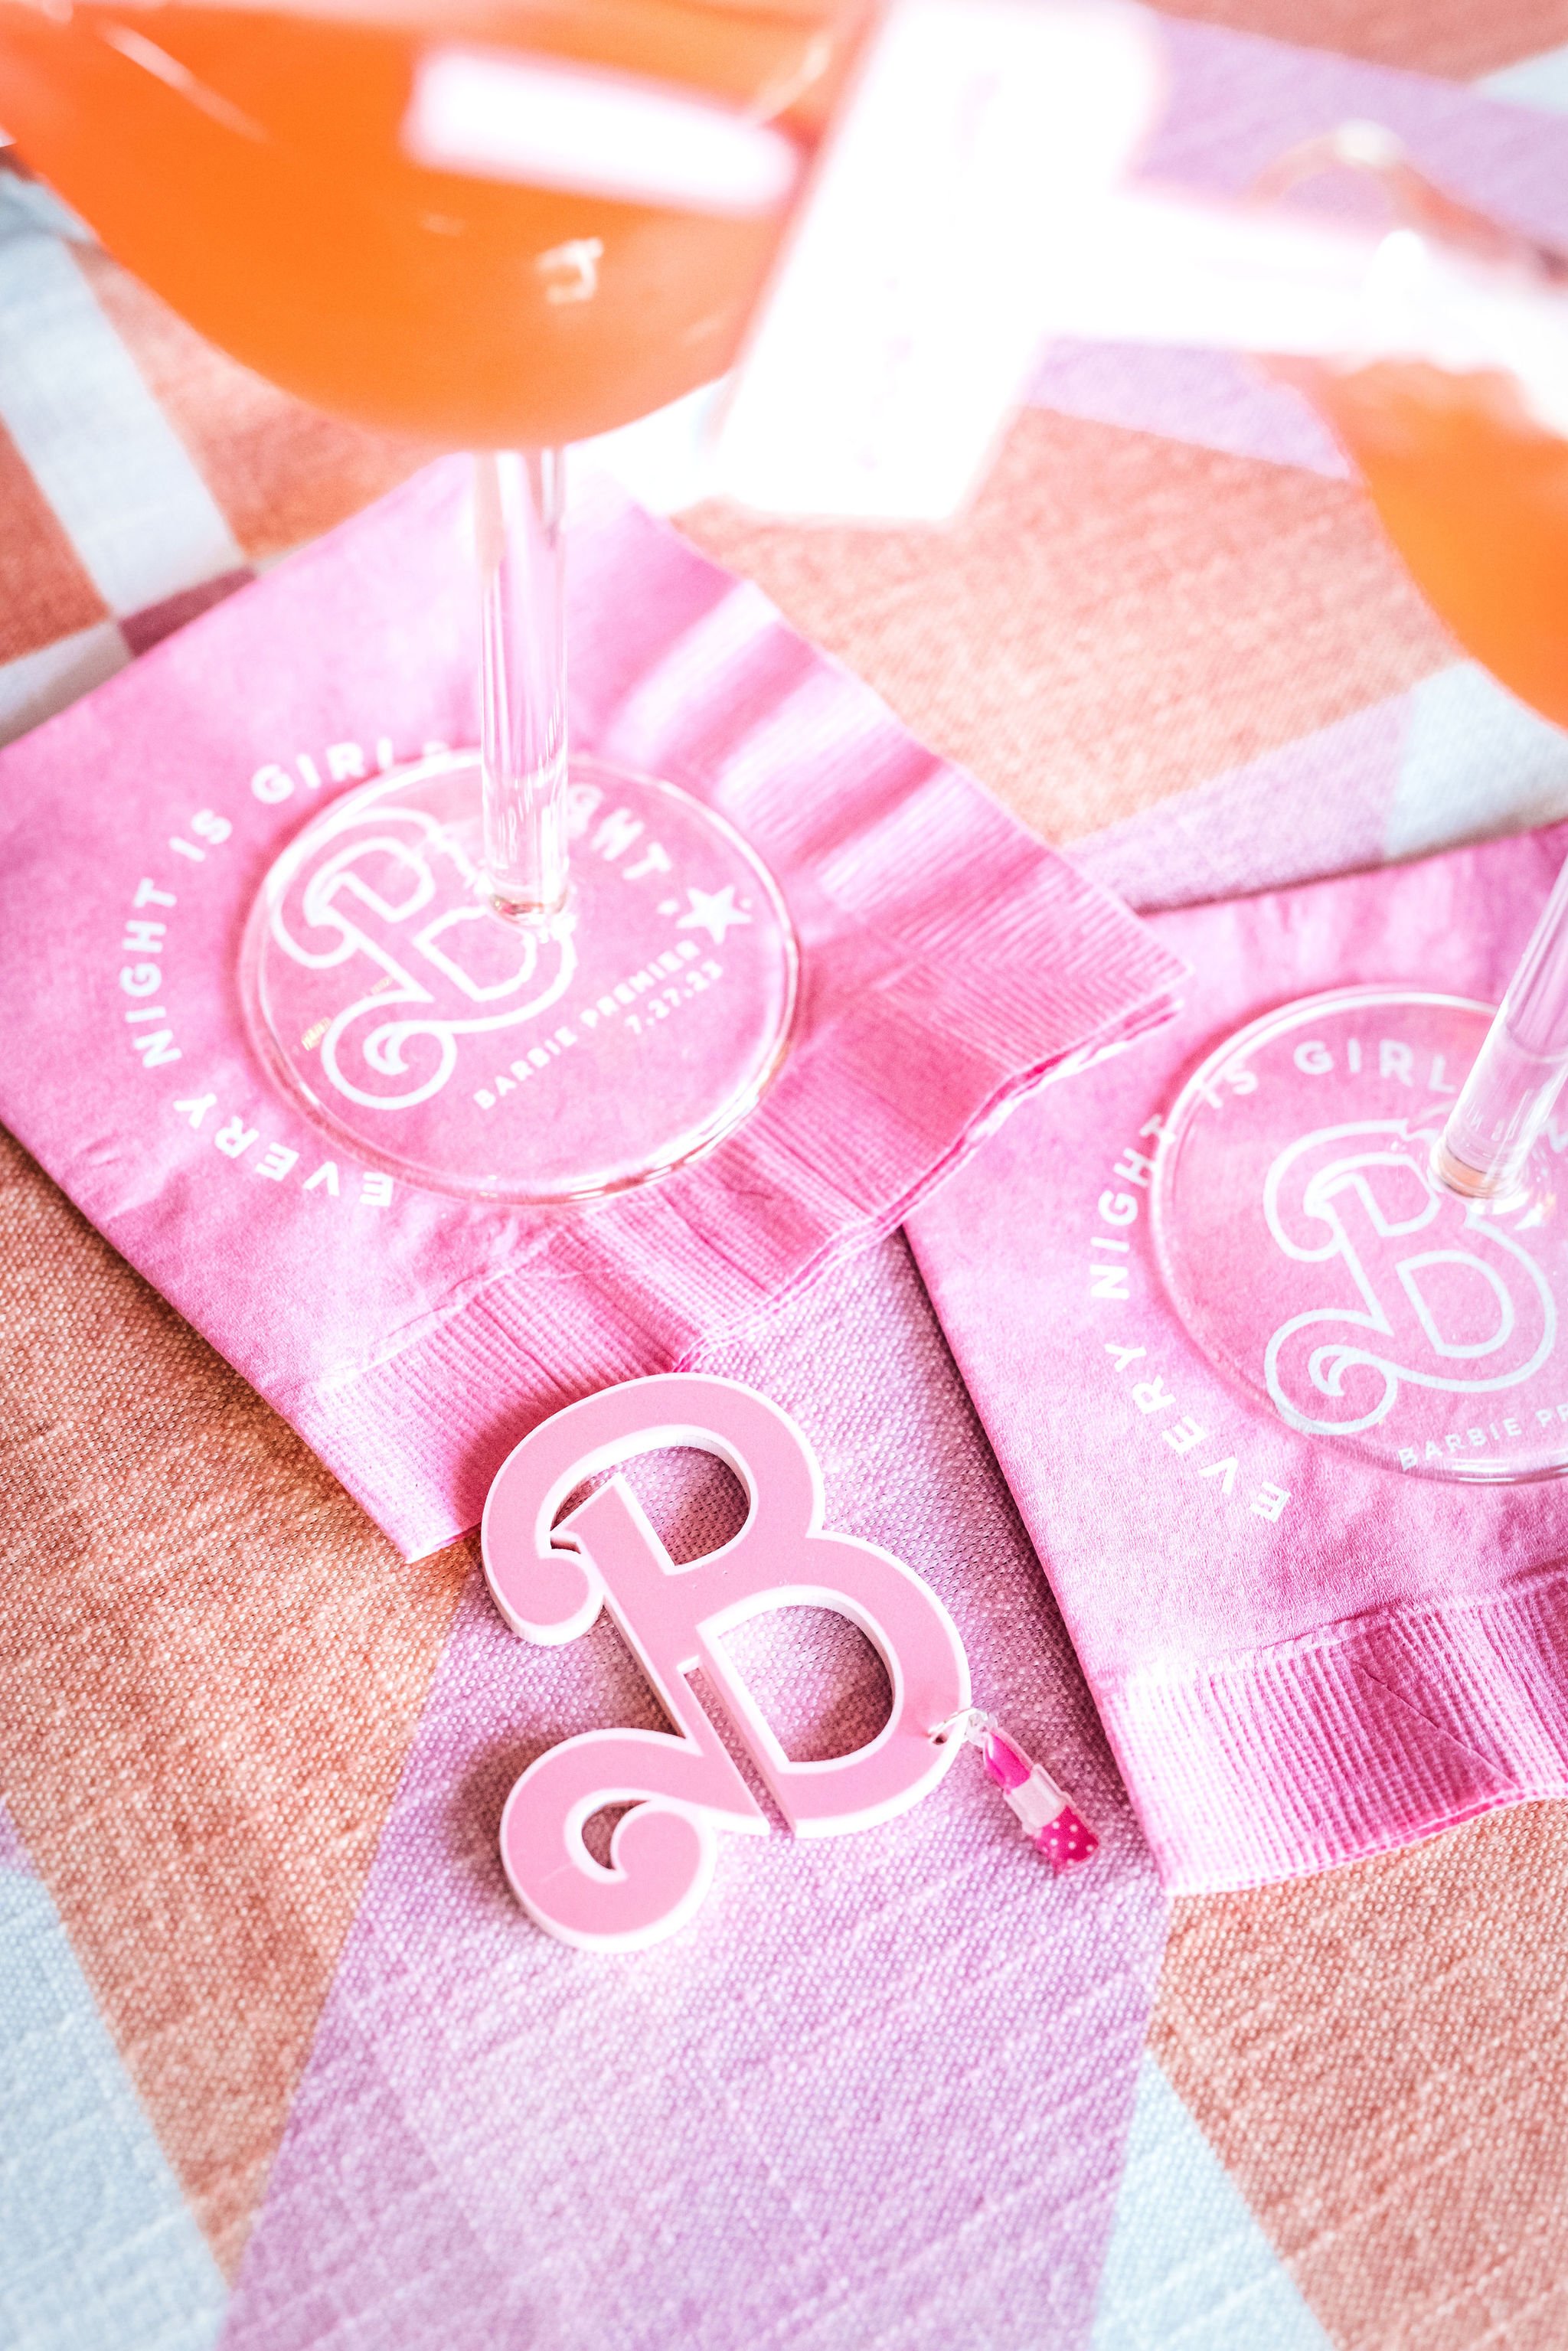 Customized Barbie Party cocktail napkins and favors. Get more ideas for a Barbie Movie Party at www.minteventdesign.com!